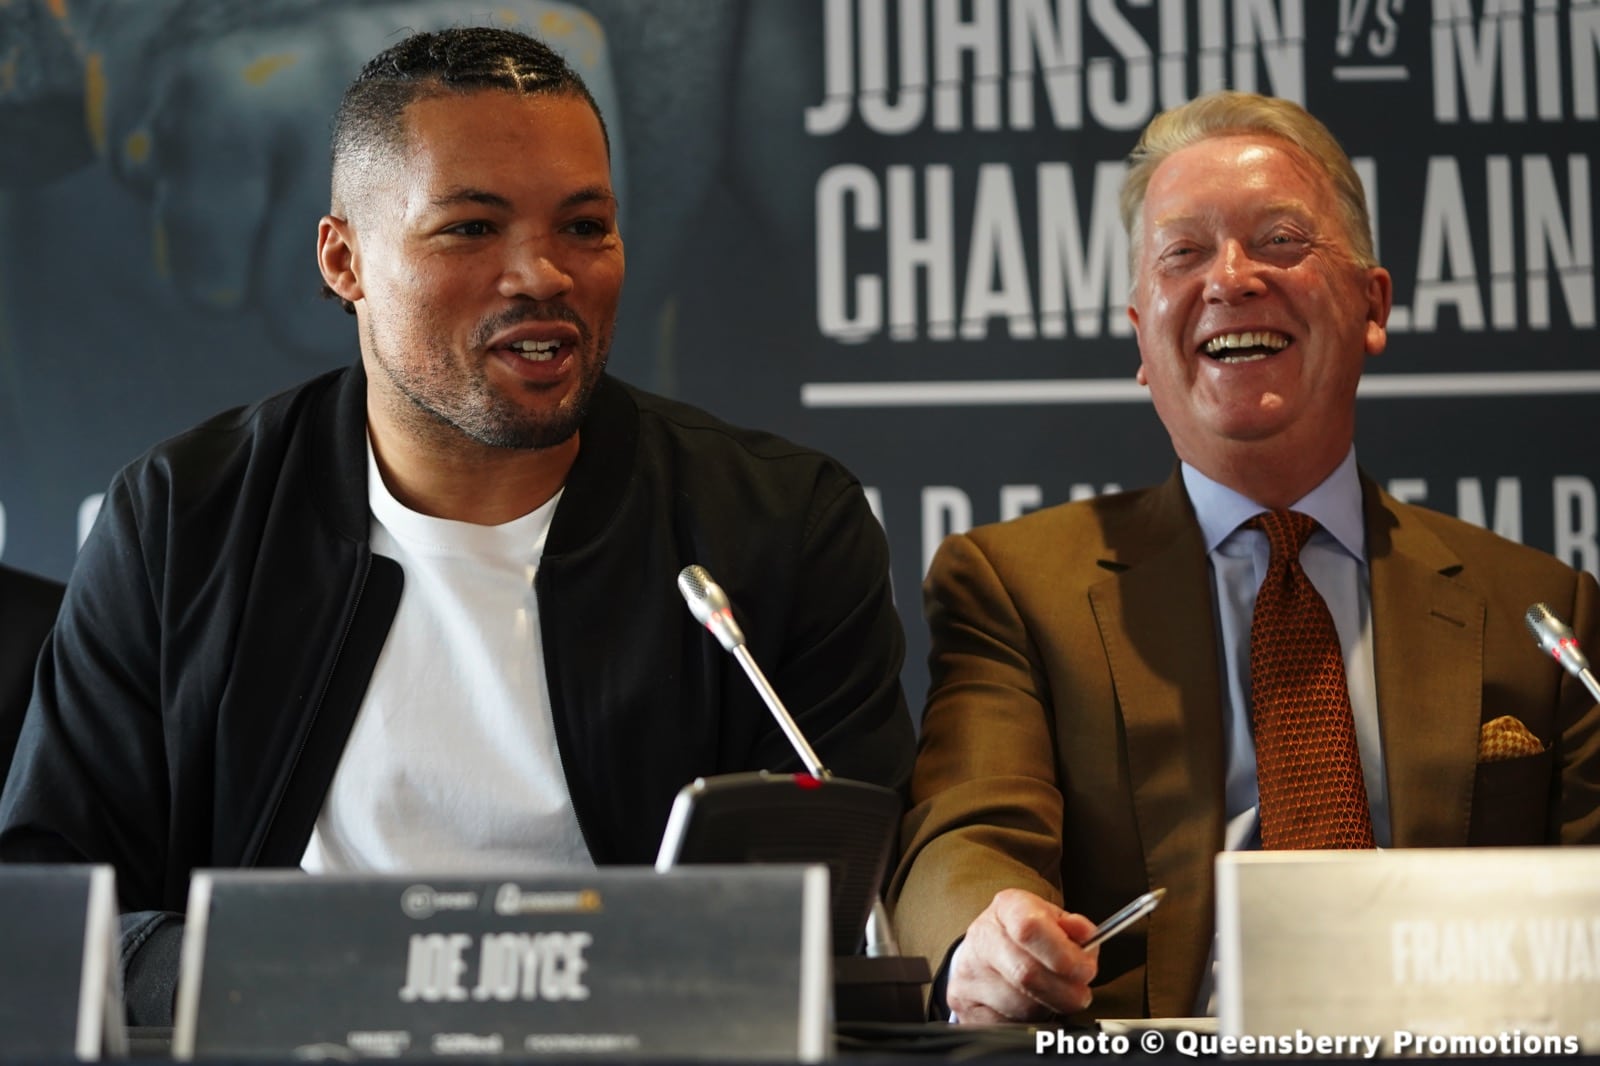 Image: Joe Joyce ready for Usyk or Fury after beating Hammer